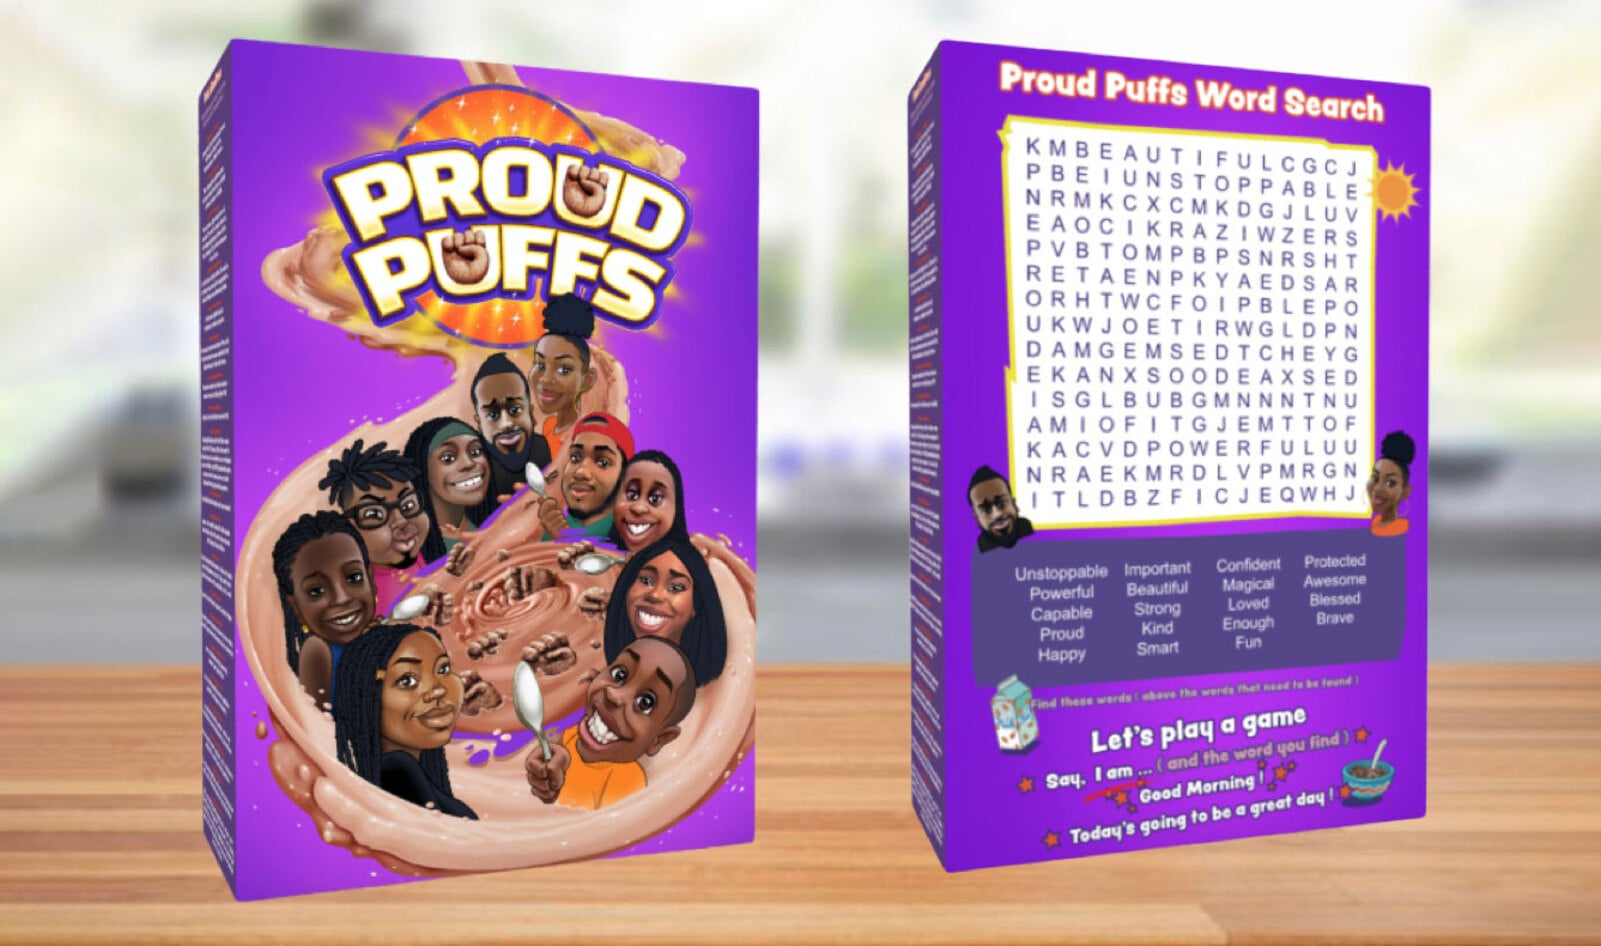 Vegan Black-Owned Cereal Brand Is Serving Up Empowerment, Too